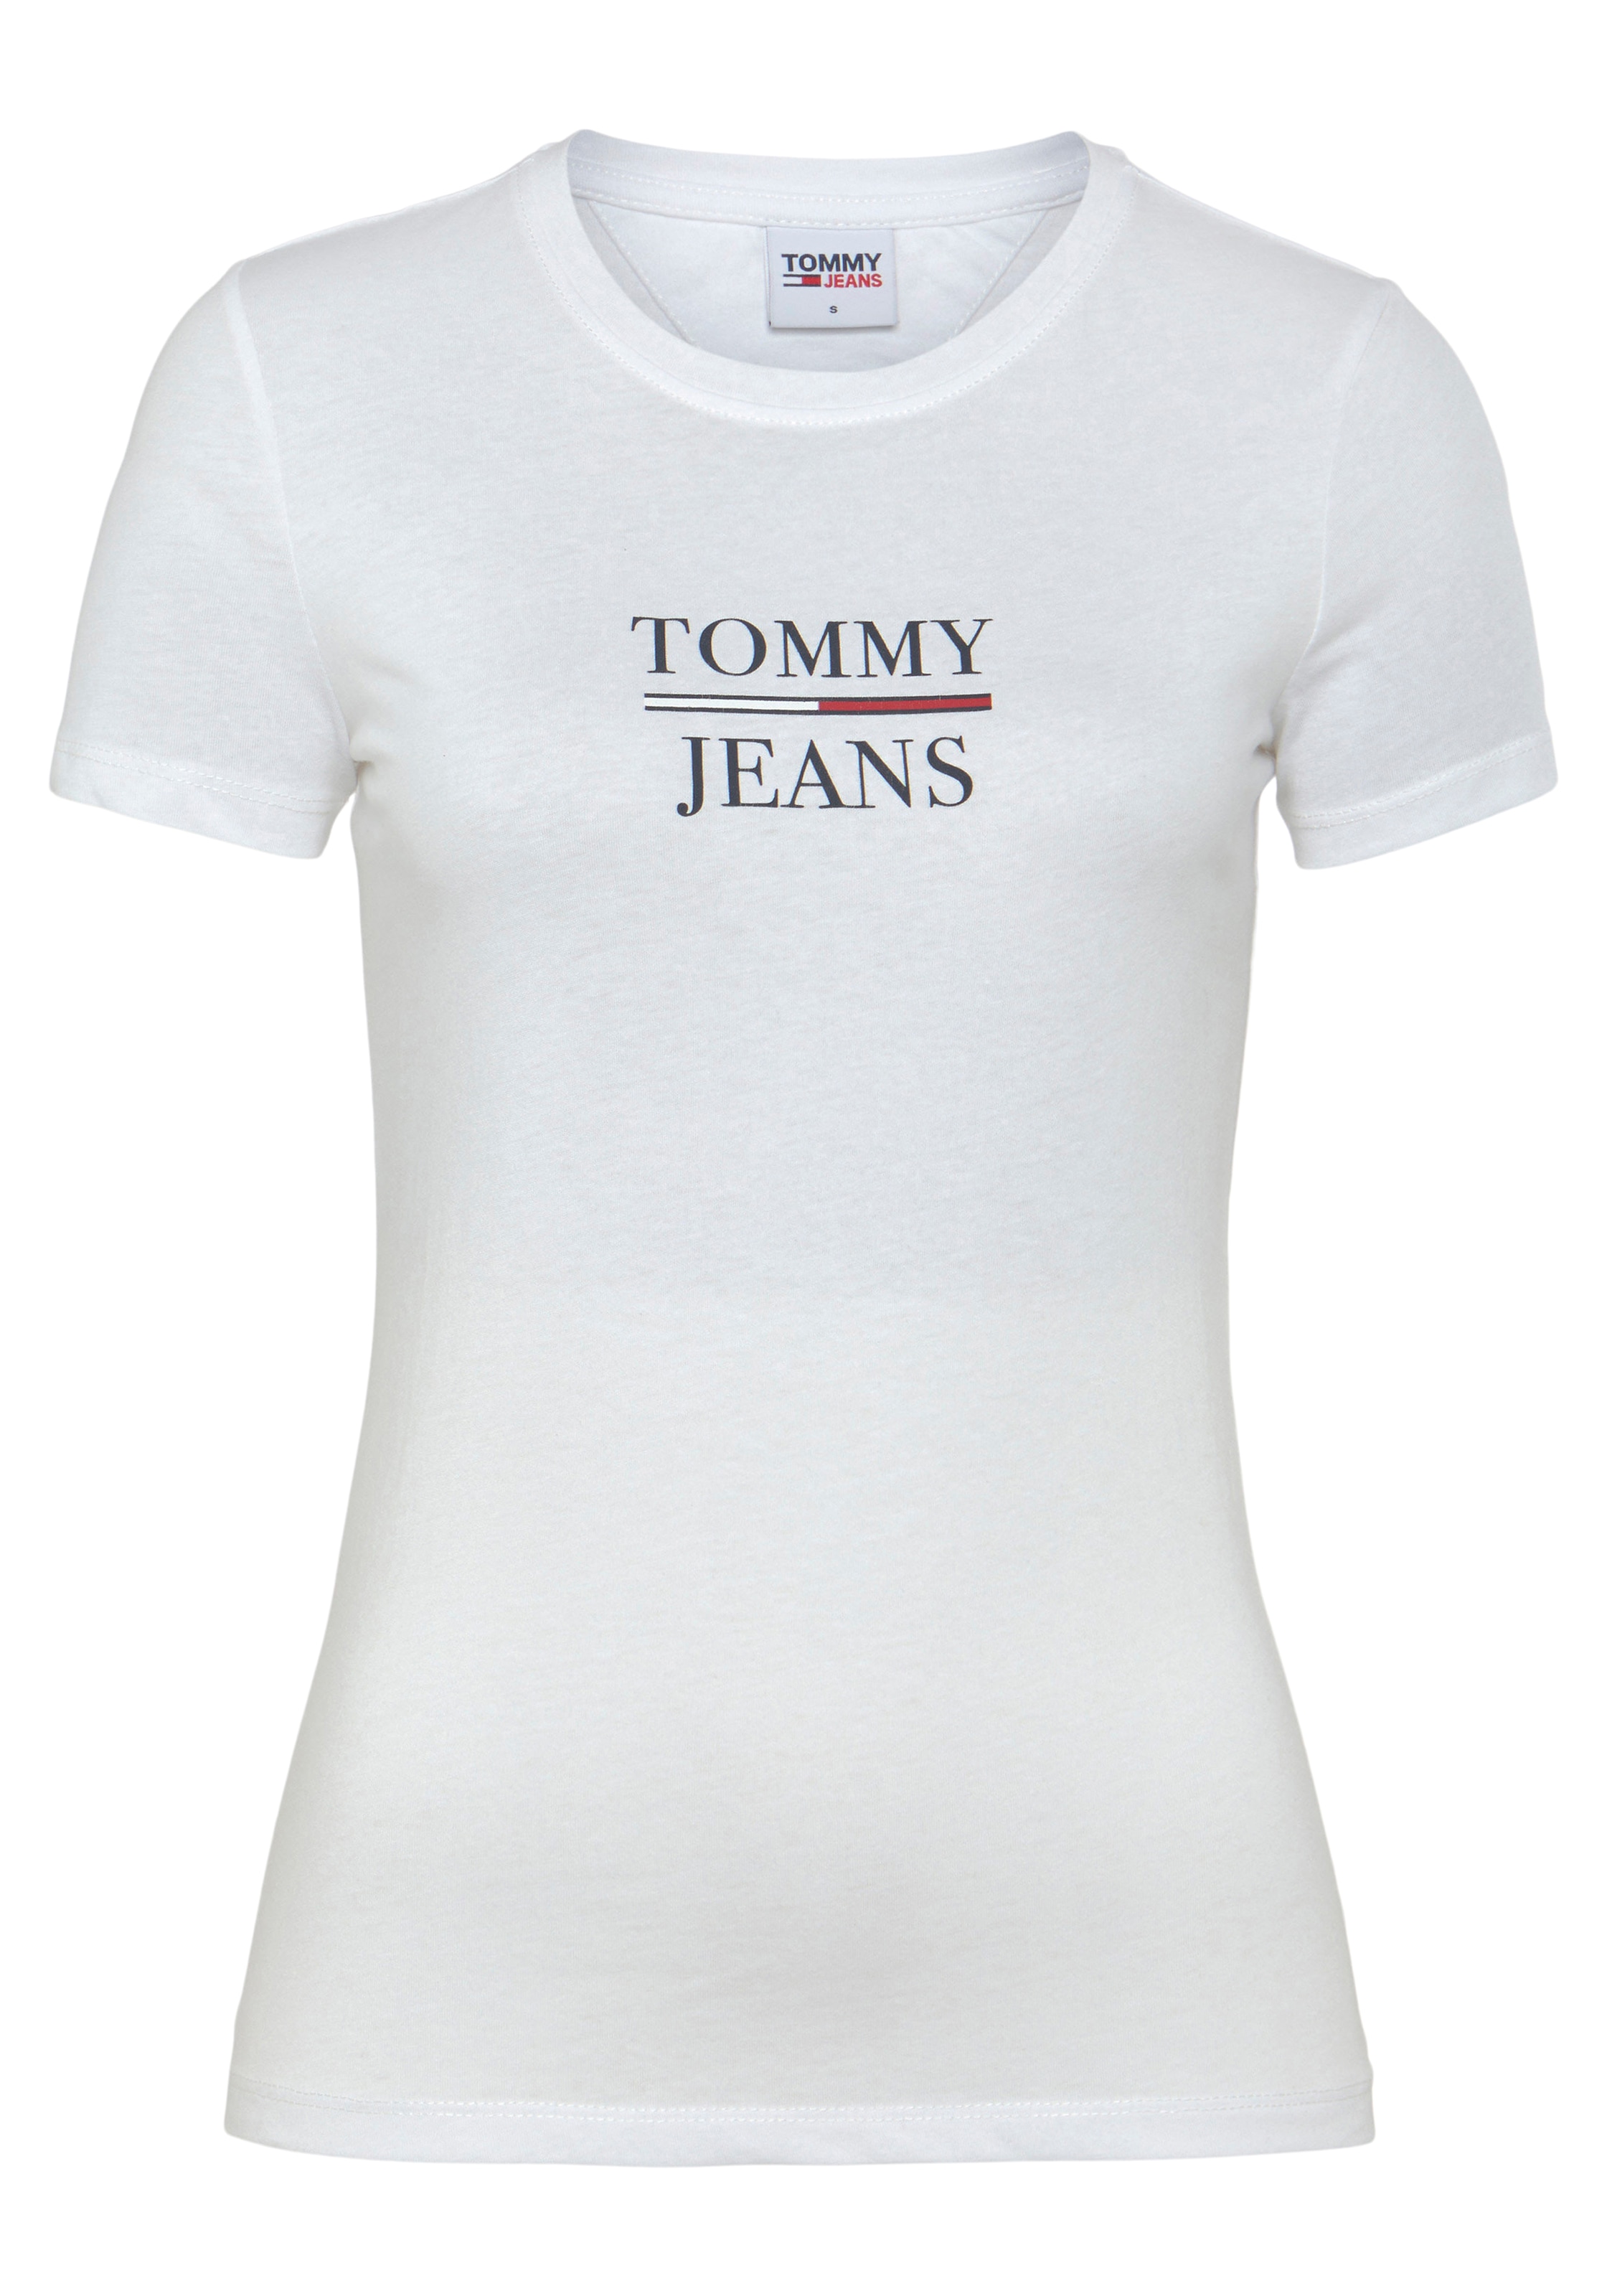 T ESS T-Shirt Jeans bei »TJW Tommy 2er-Pack) TOMMY SS«, Skinny 2PACK (Packung, ♕